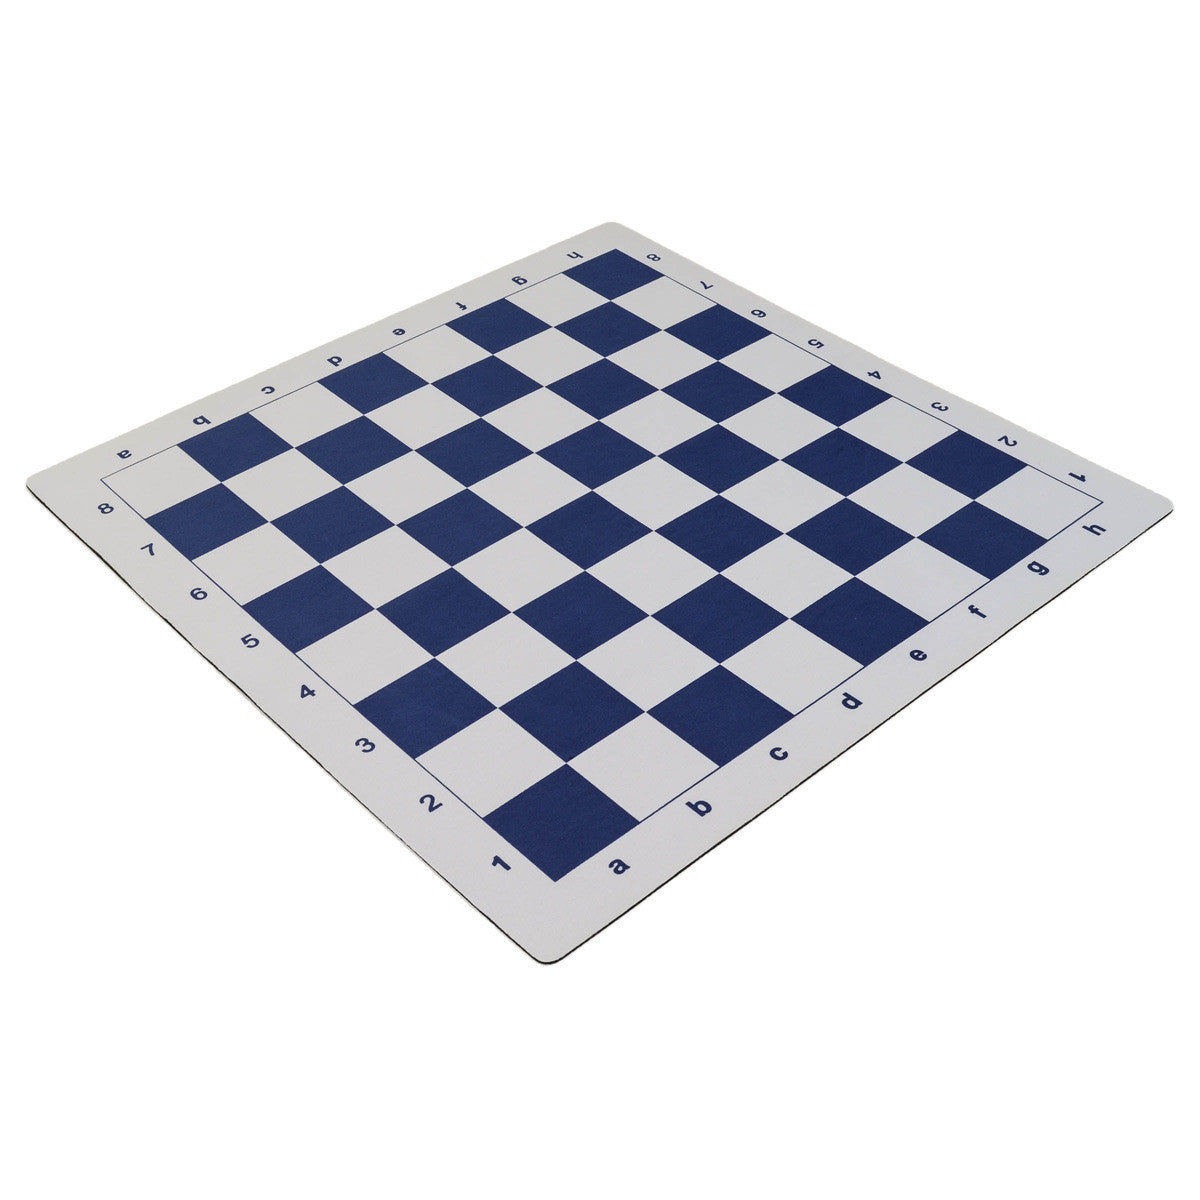 Mousepad Vinyl Chess Board with 2.25" Squares